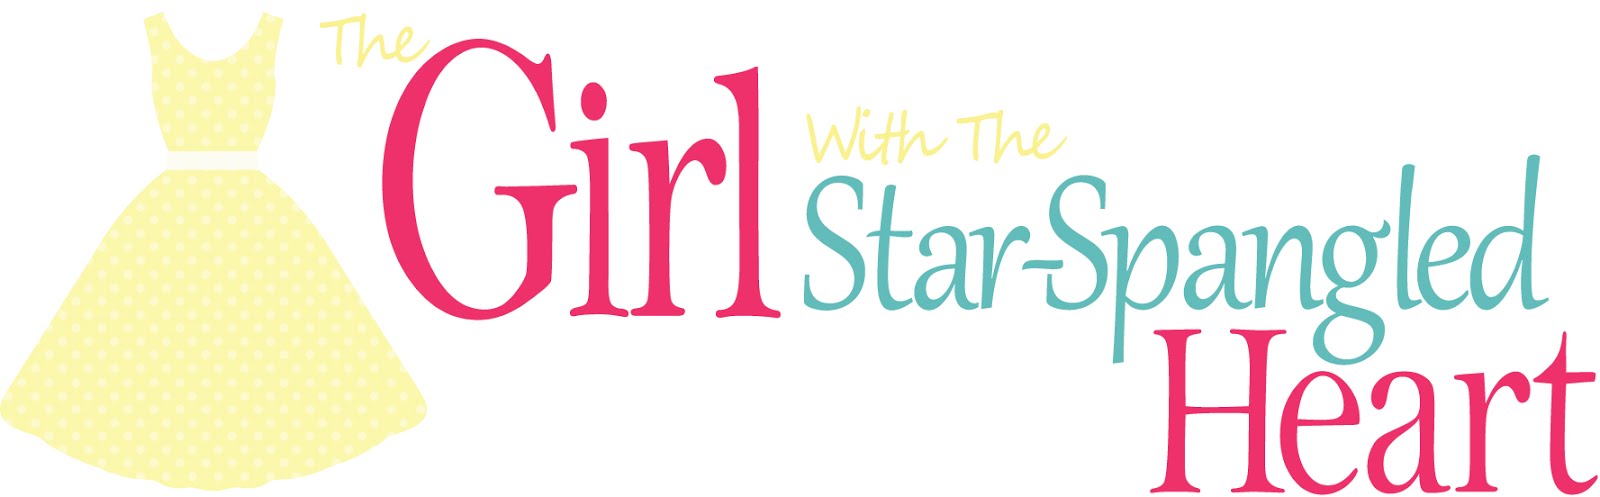 The Girl with the Star-Spangled Heart